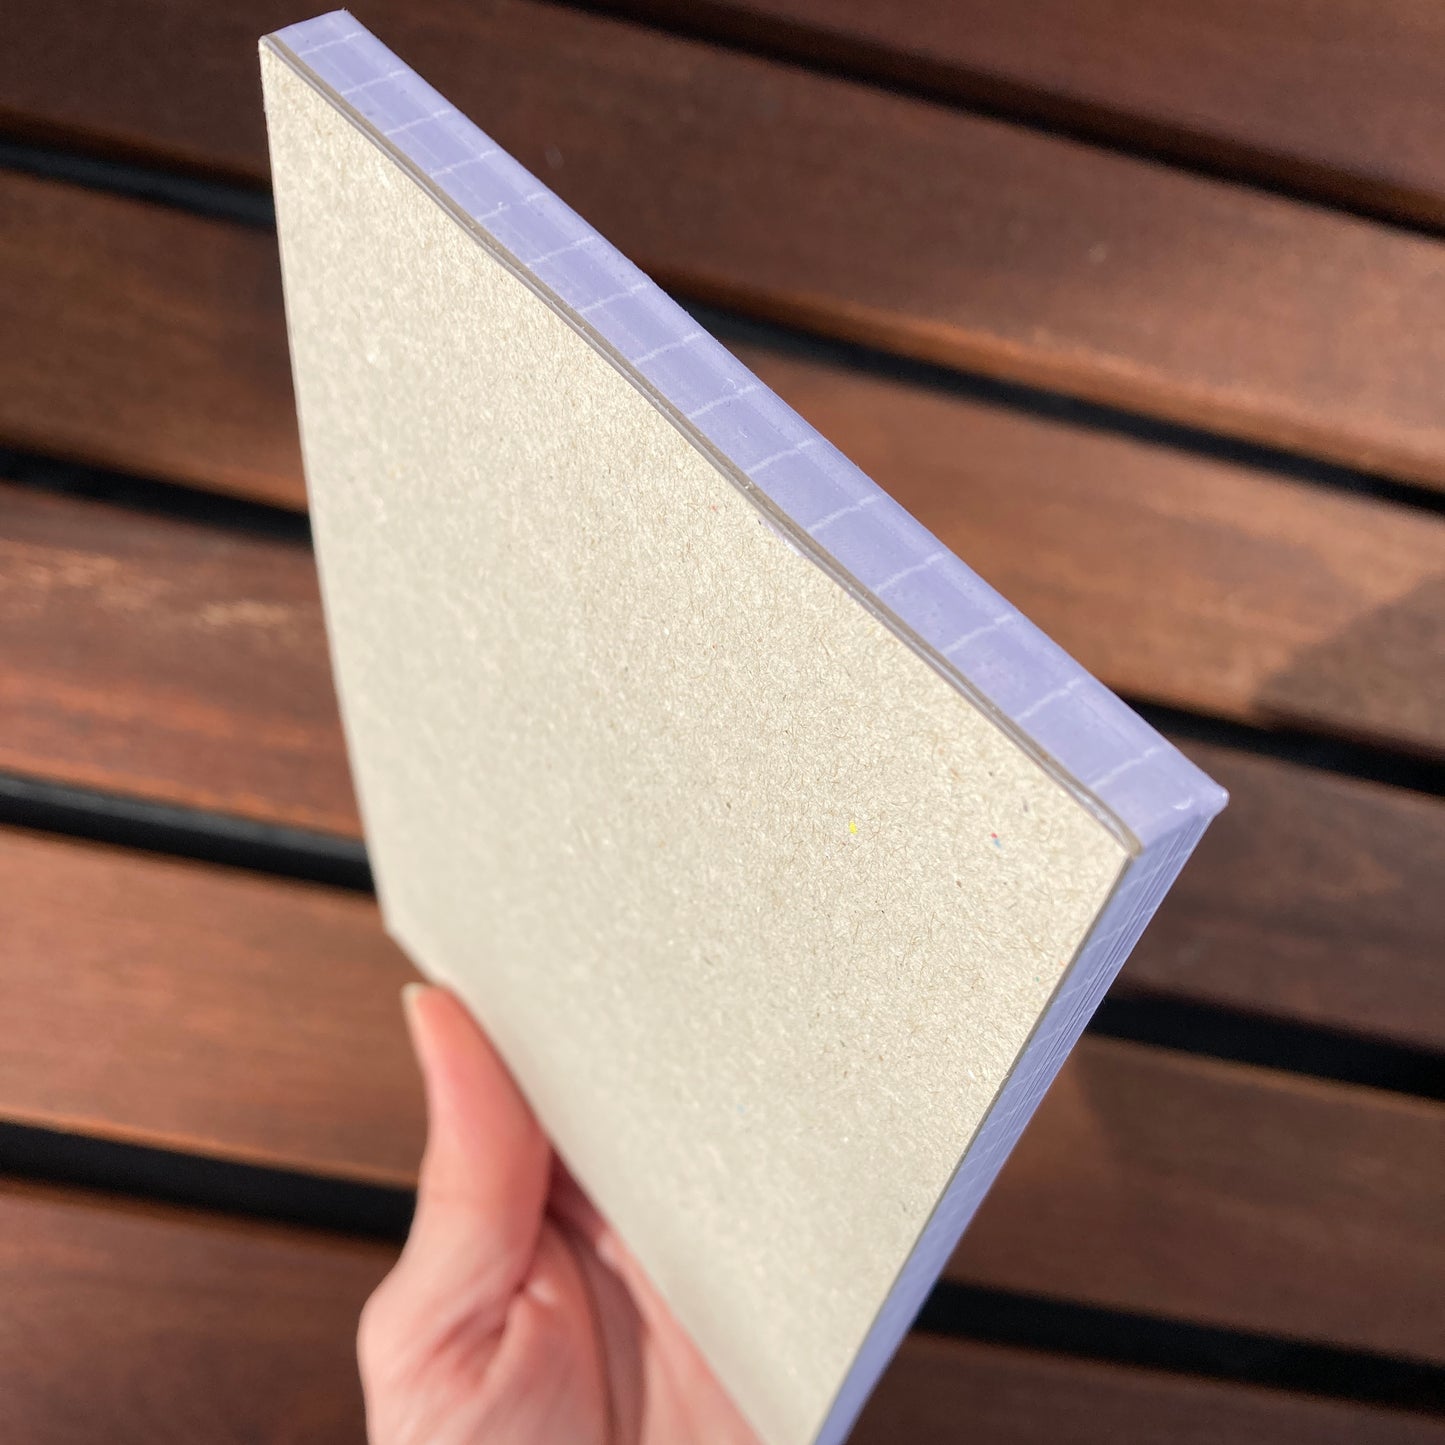 A hand holding the notepad at an angle to show the brown greyboard back of the notepad.